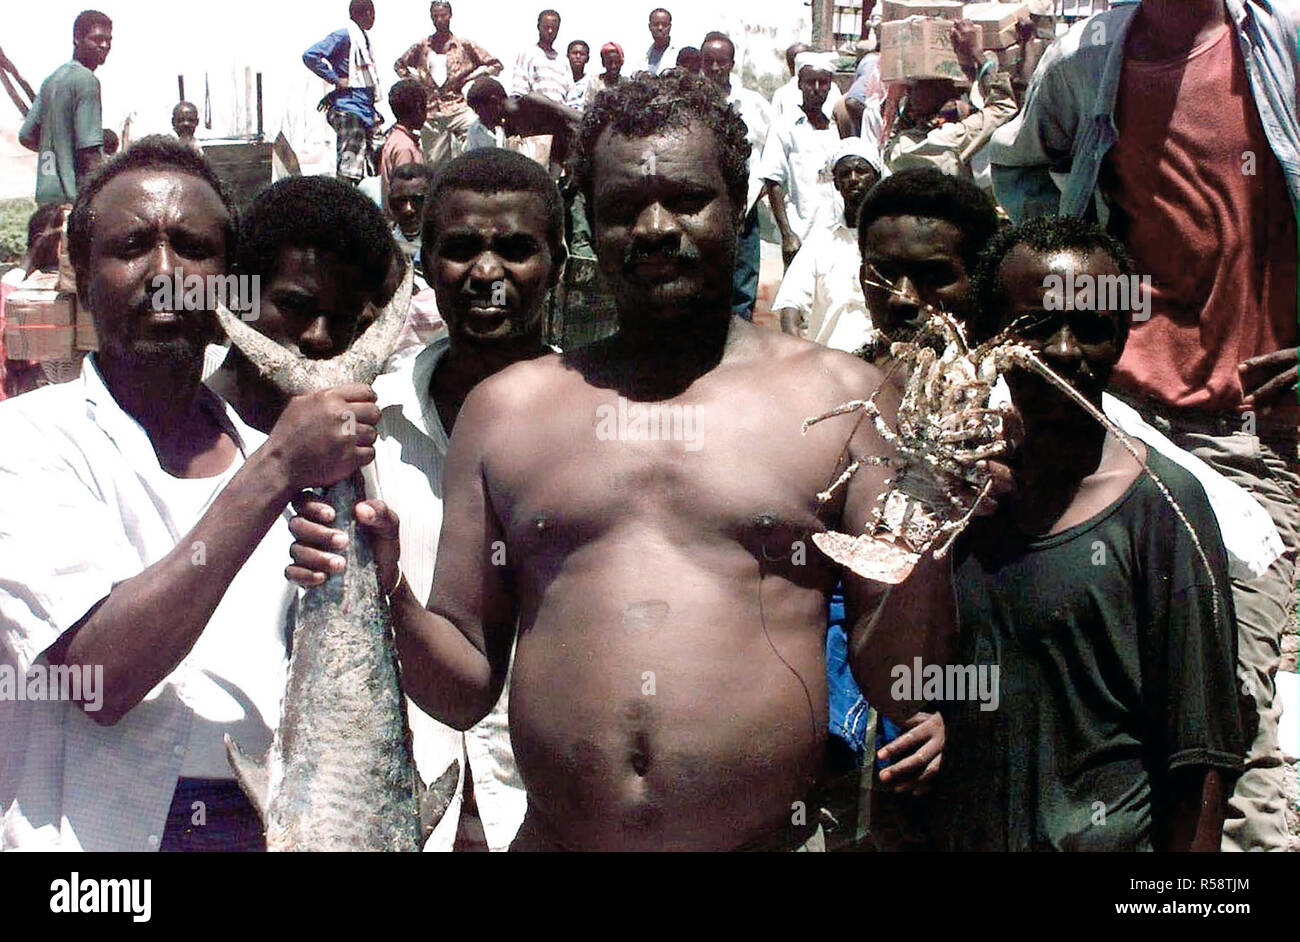 1993 - Two Somali men face the camera and hold up some of the seafood available at a beachside market in Mogadishu.  Four other Somali men stand just behind the first two and face the camera. Stock Photo